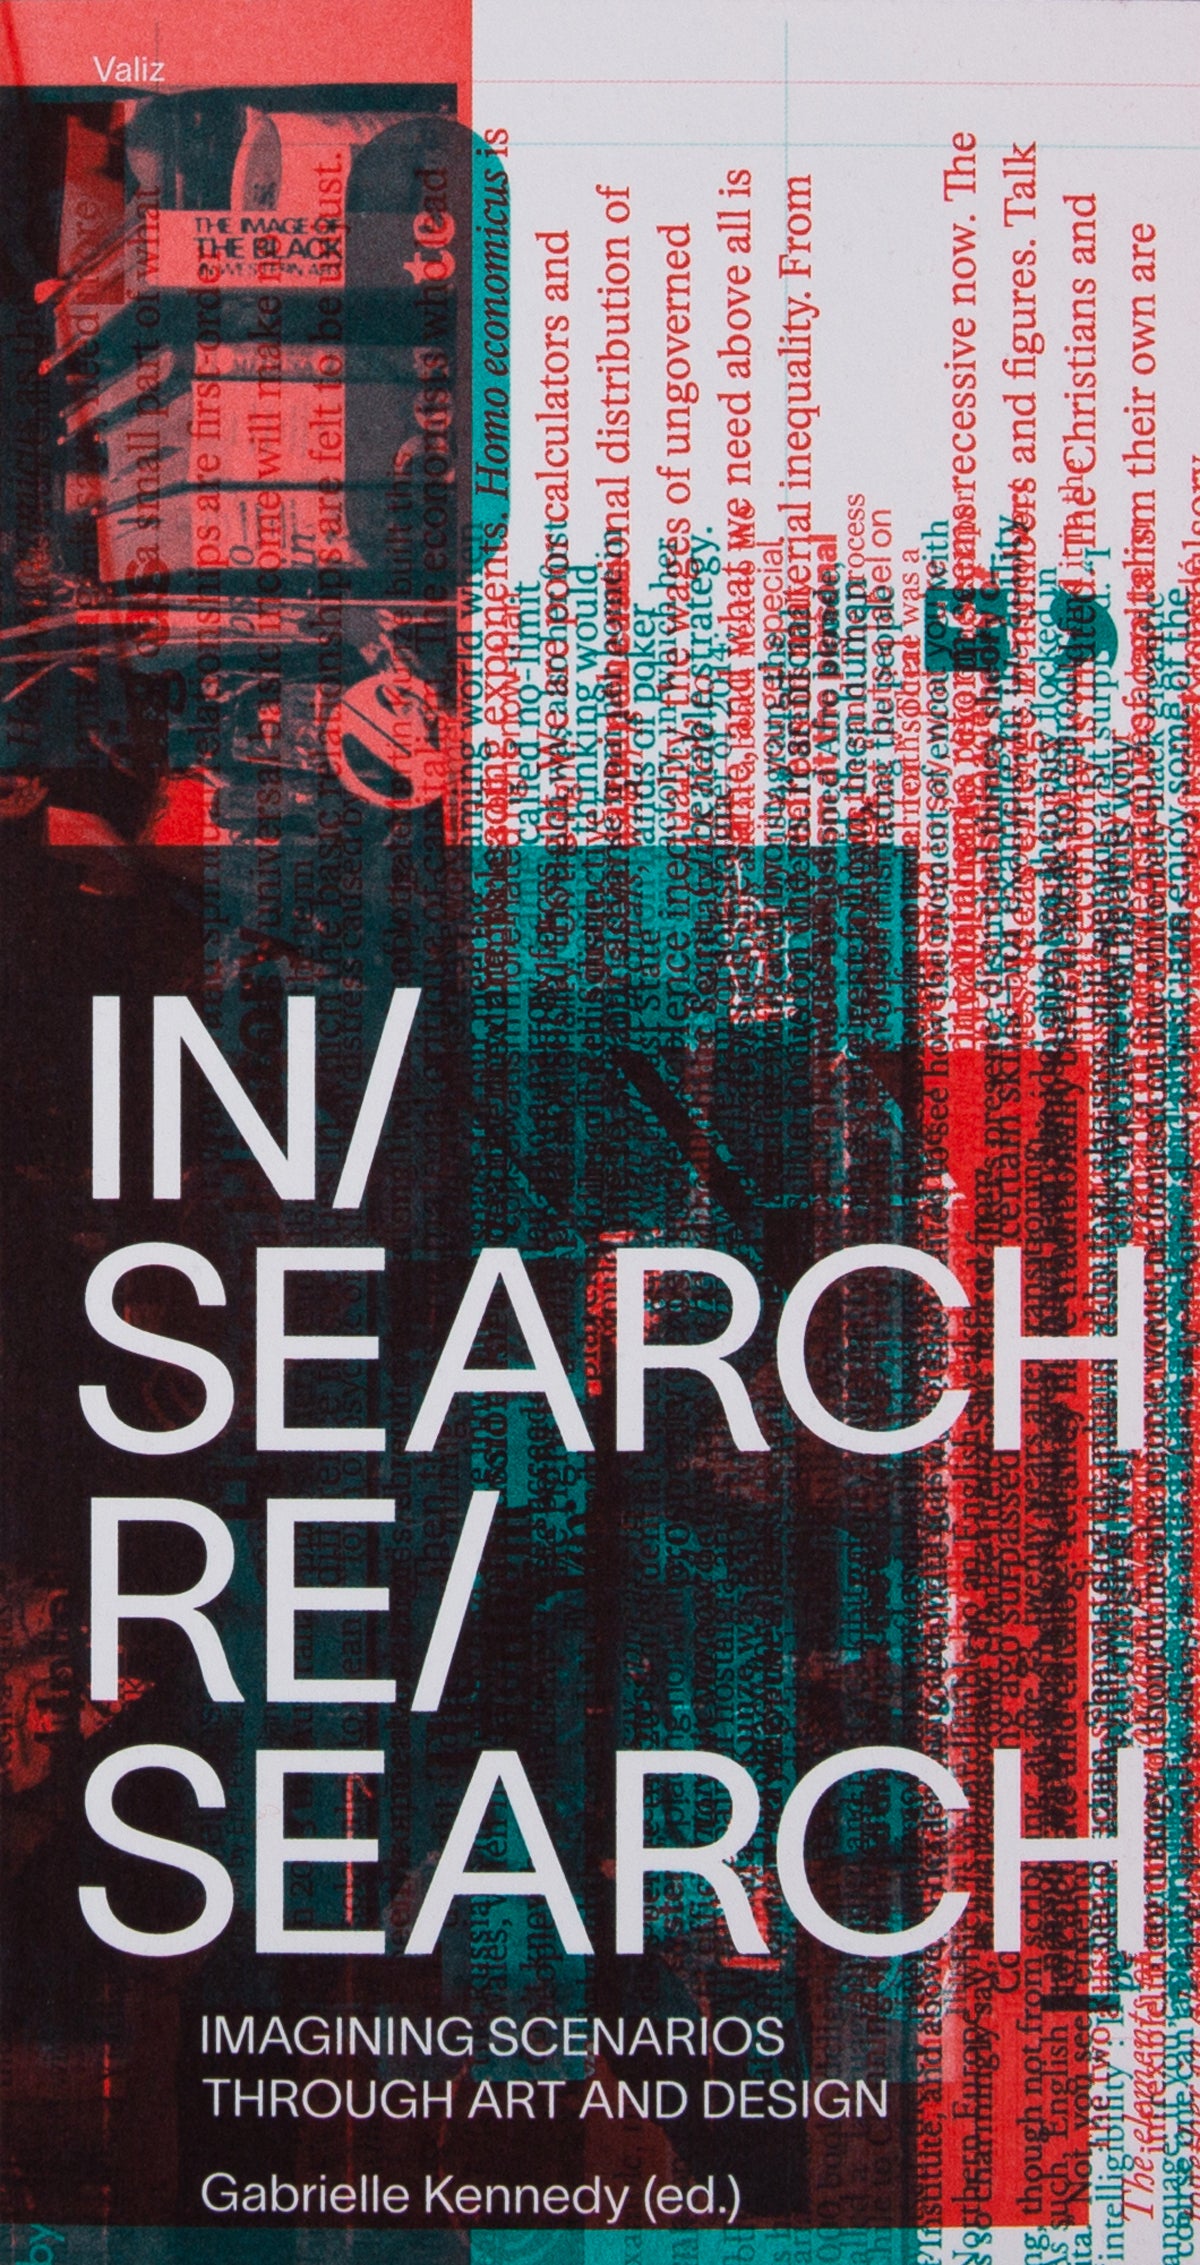 In/search Re/search